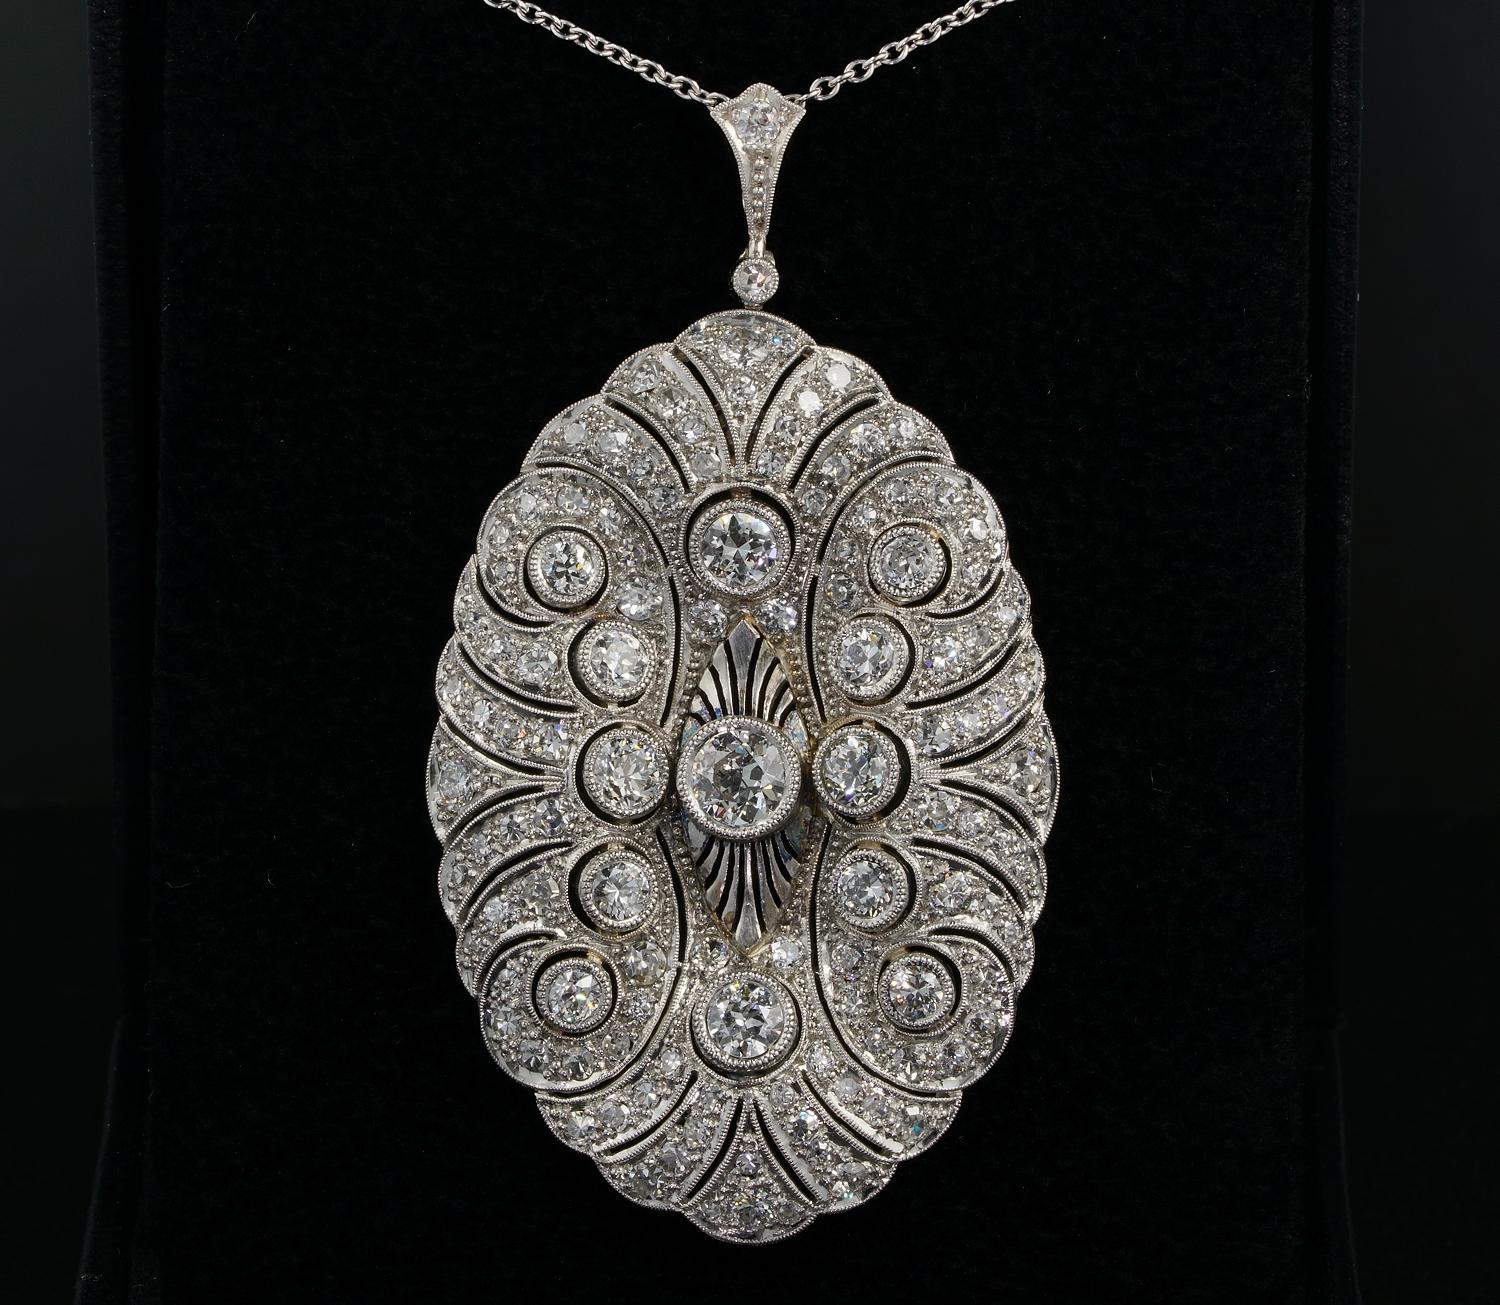 Quietly Spectacular!

For the wearer a necklace provides the opportunity to make a statement and create a personal image
This indeed amazing, large jumbo sized oval pendant, is simple style, yet imposing and important
Art Deco period at peak -